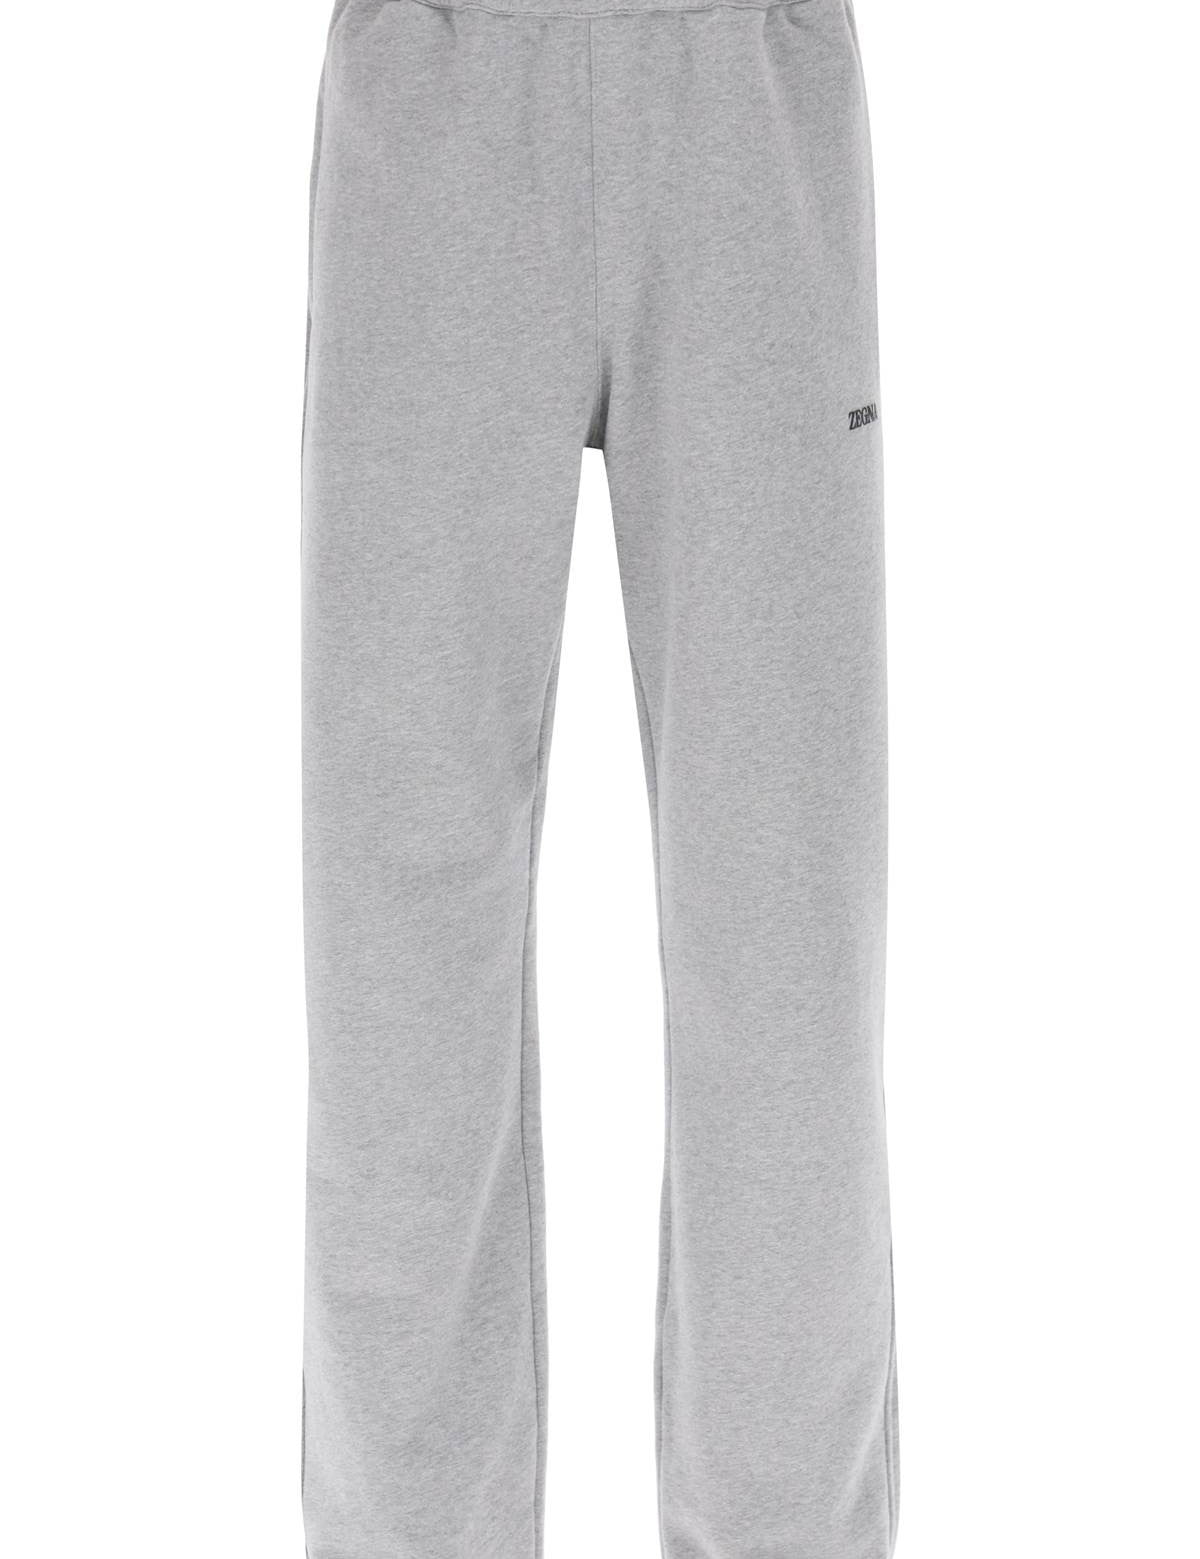 zegna-joggers-with-rubberized-logo.jpg